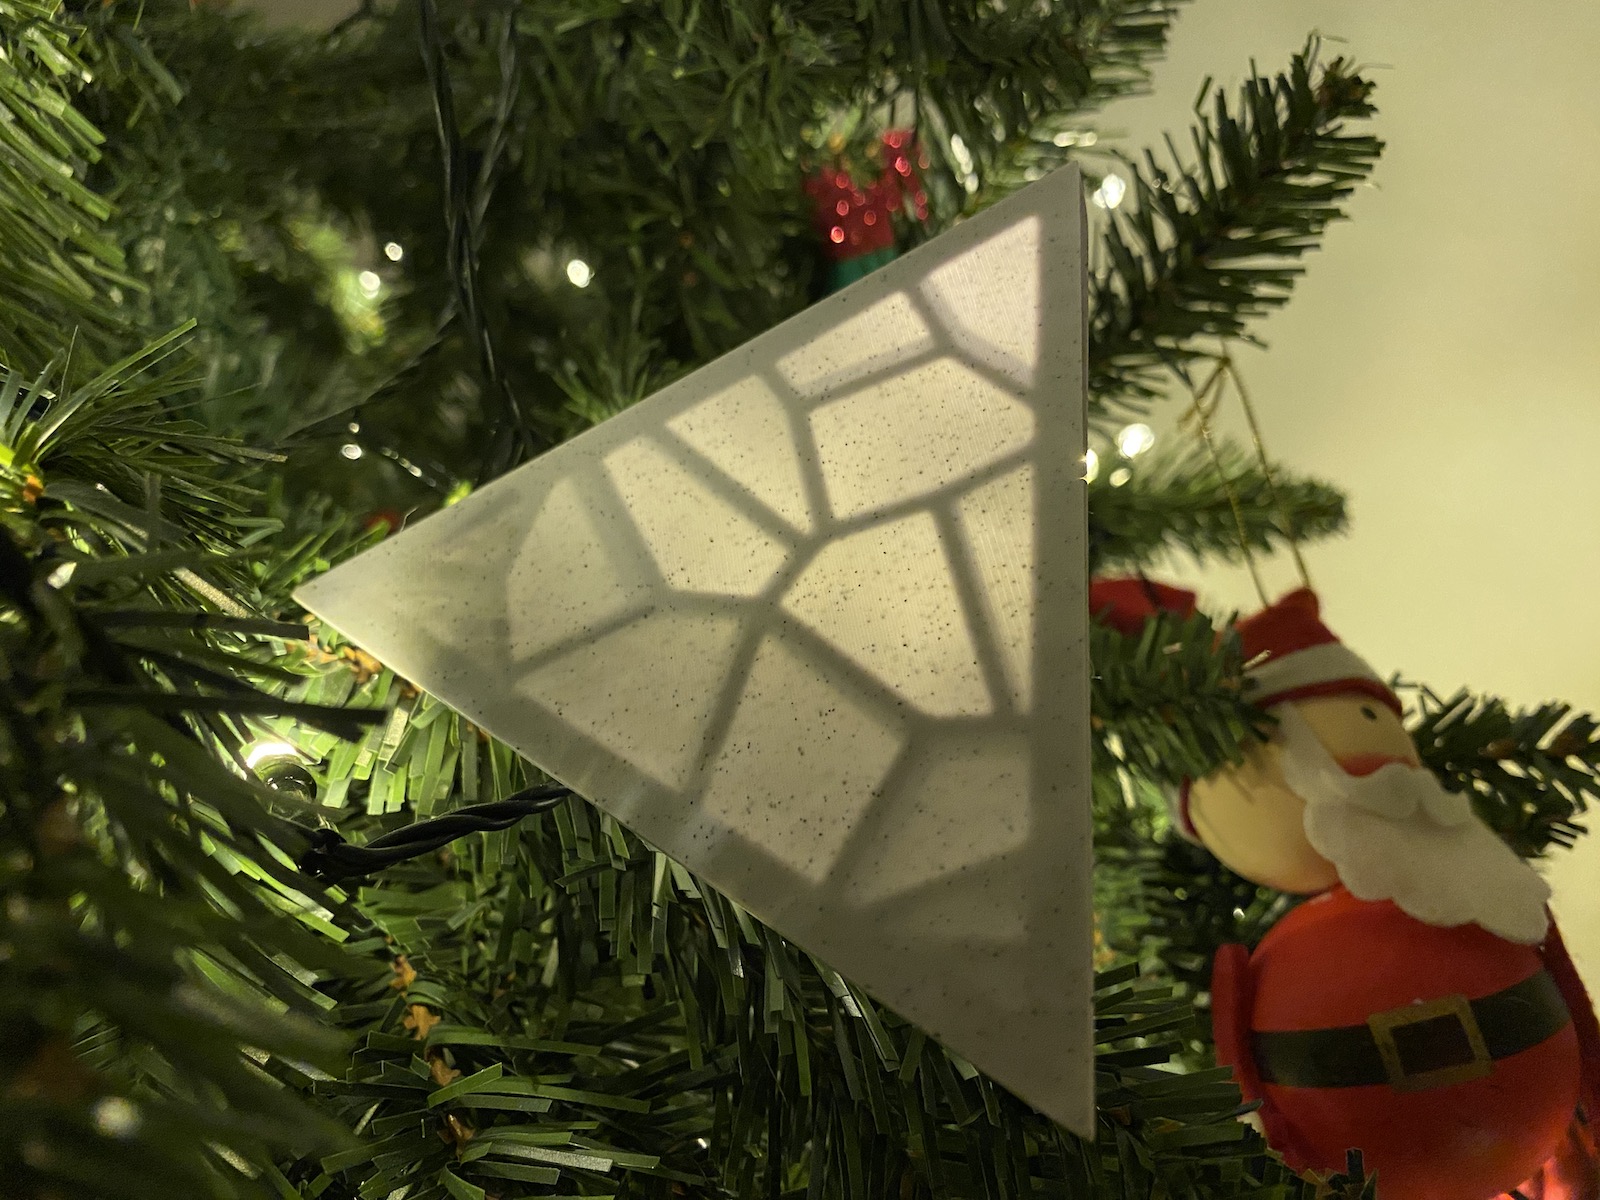 a 3d printed pyramid hanging in a christmas tree